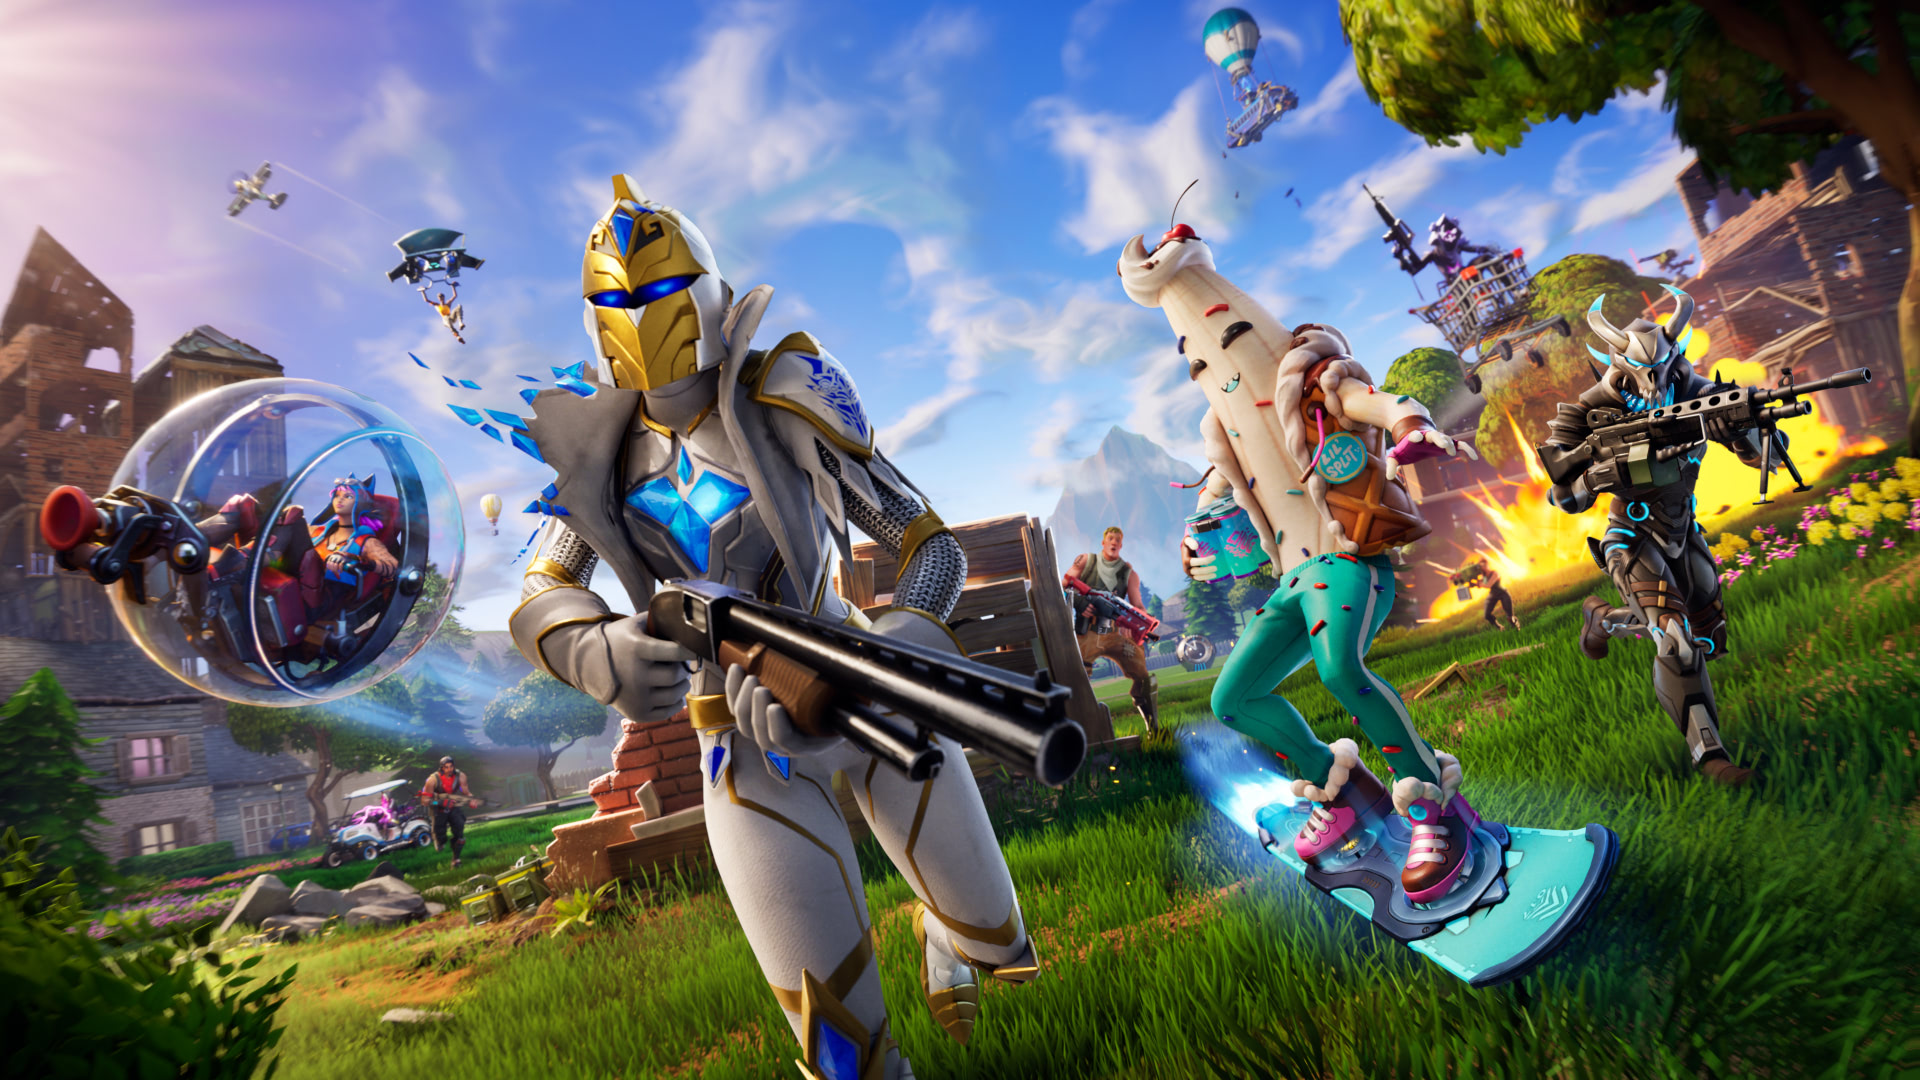 Fortnite has changed storm surge values in competitive